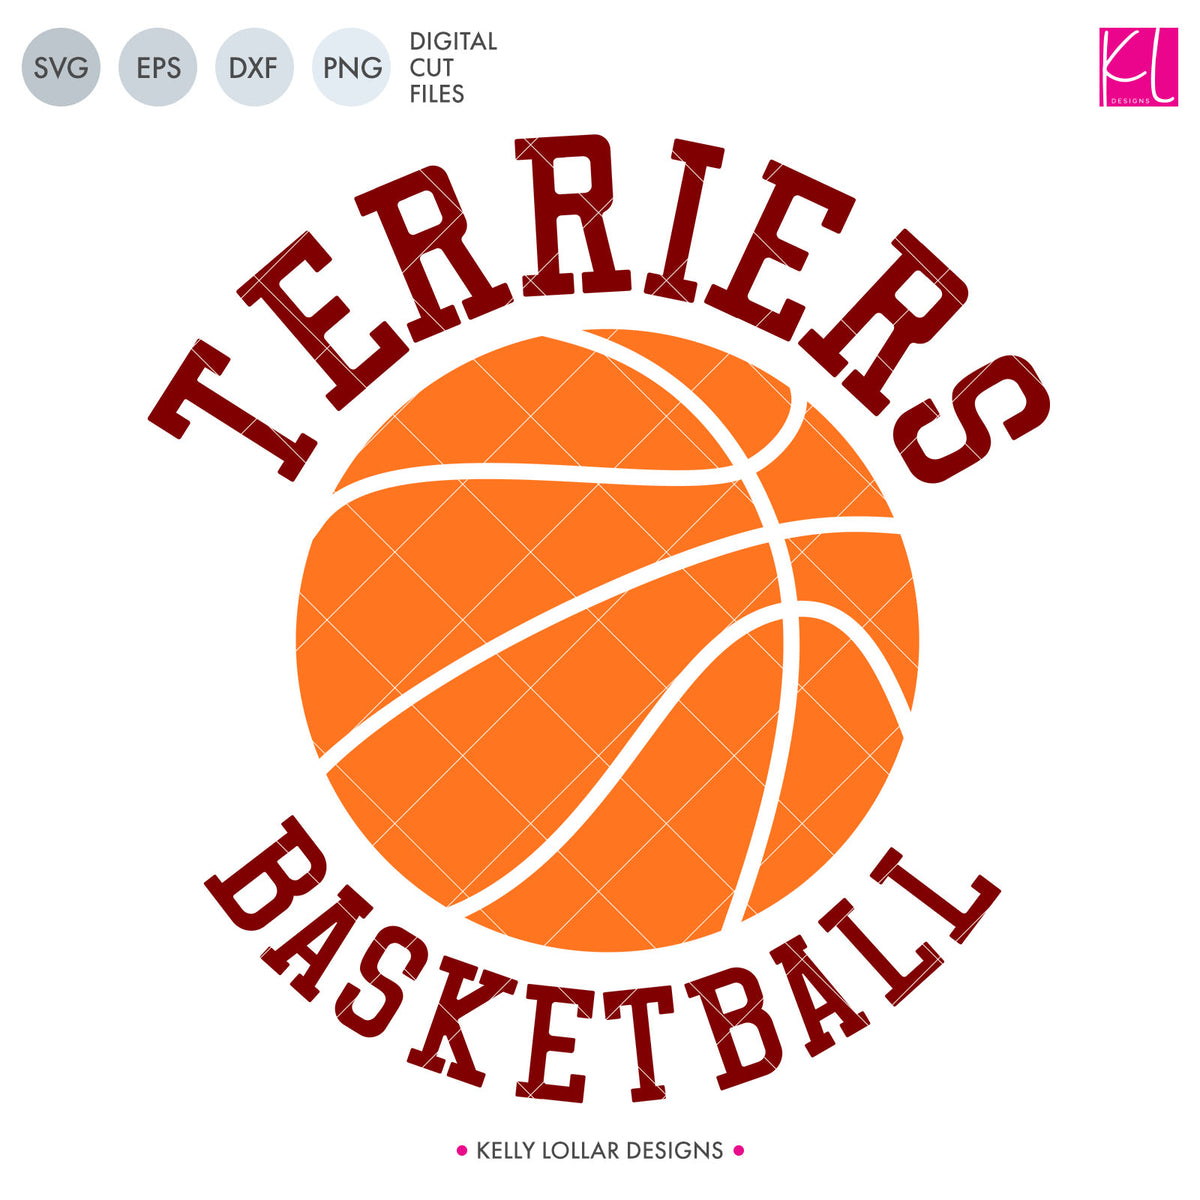 Terriers Basketball Bundle | SVG DXF EPS PNG Cut Files